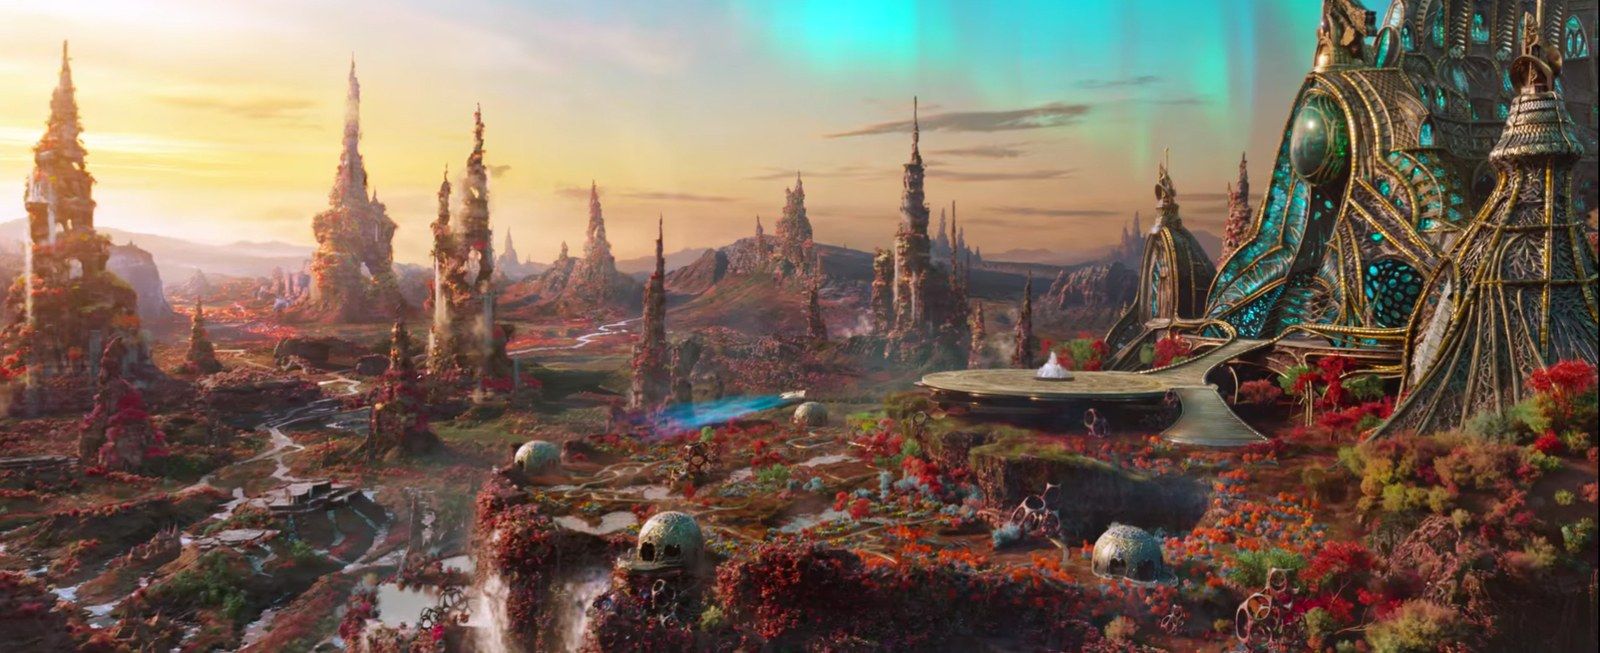 Ego the Living Planet in Guardians of the Galaxy Vol 2